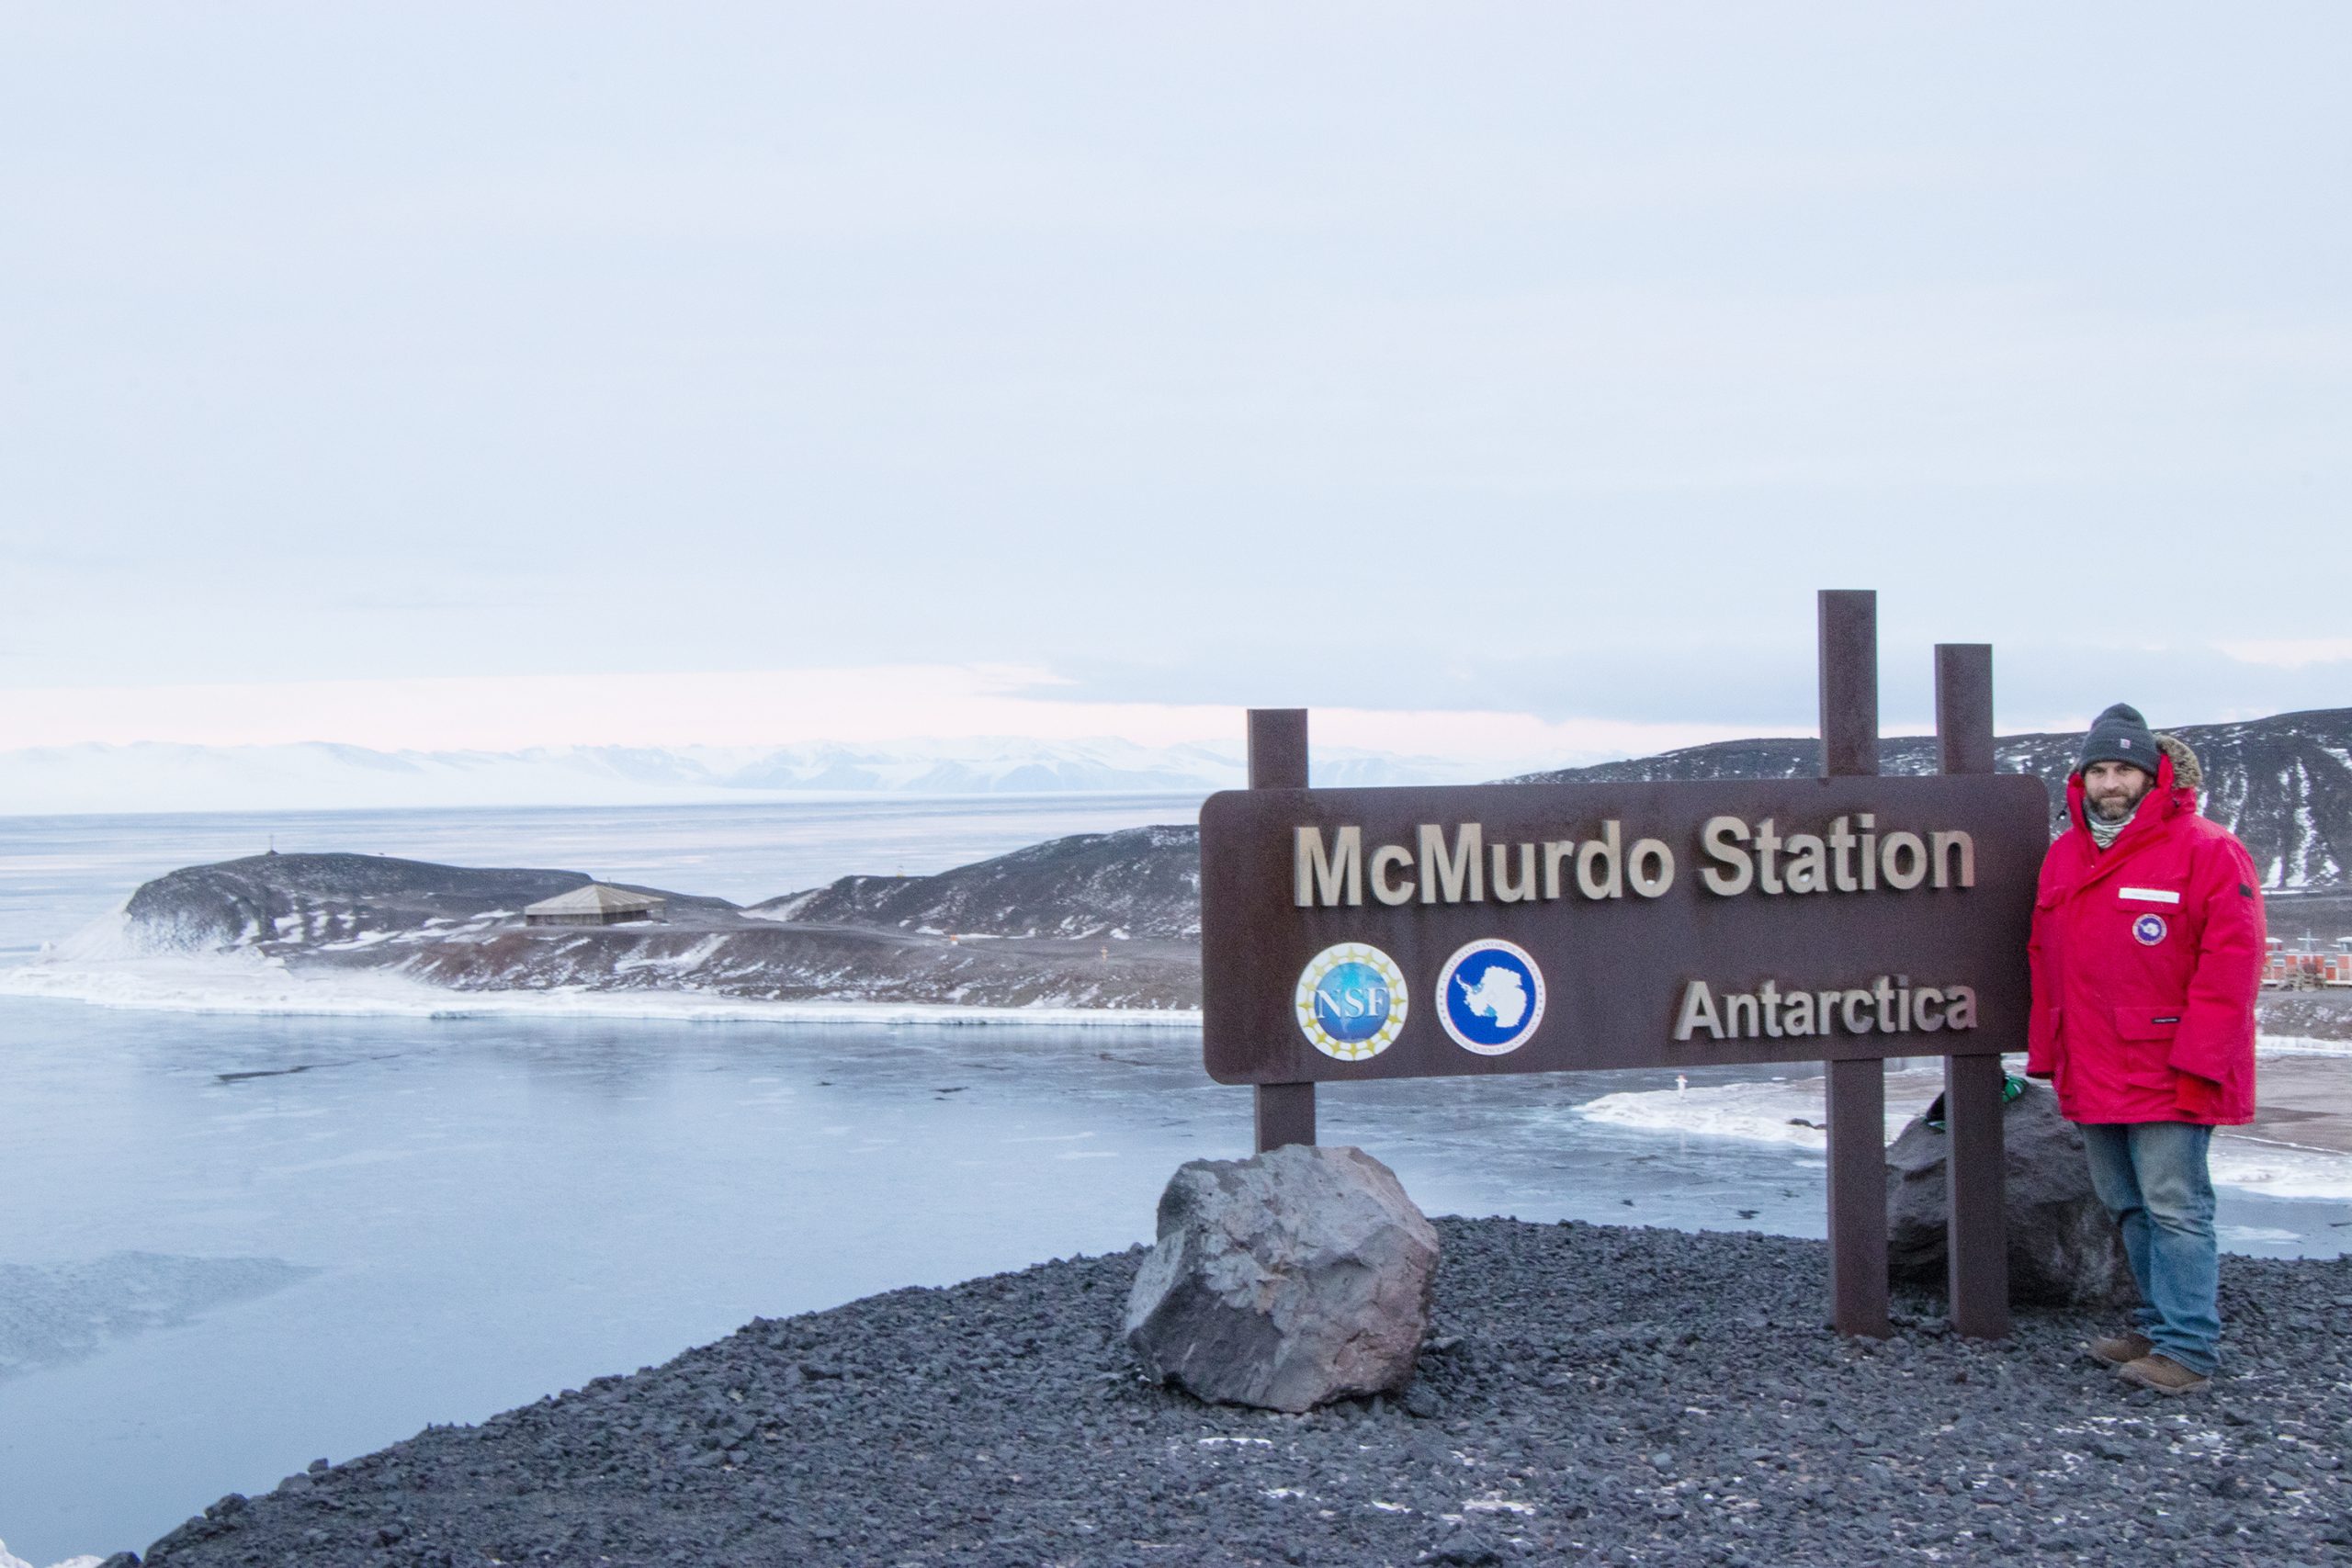 St. Cloud State alumnus Tony Abfalter has been working at McMurdo Station in Antarctica since February handling the station's communications systems.